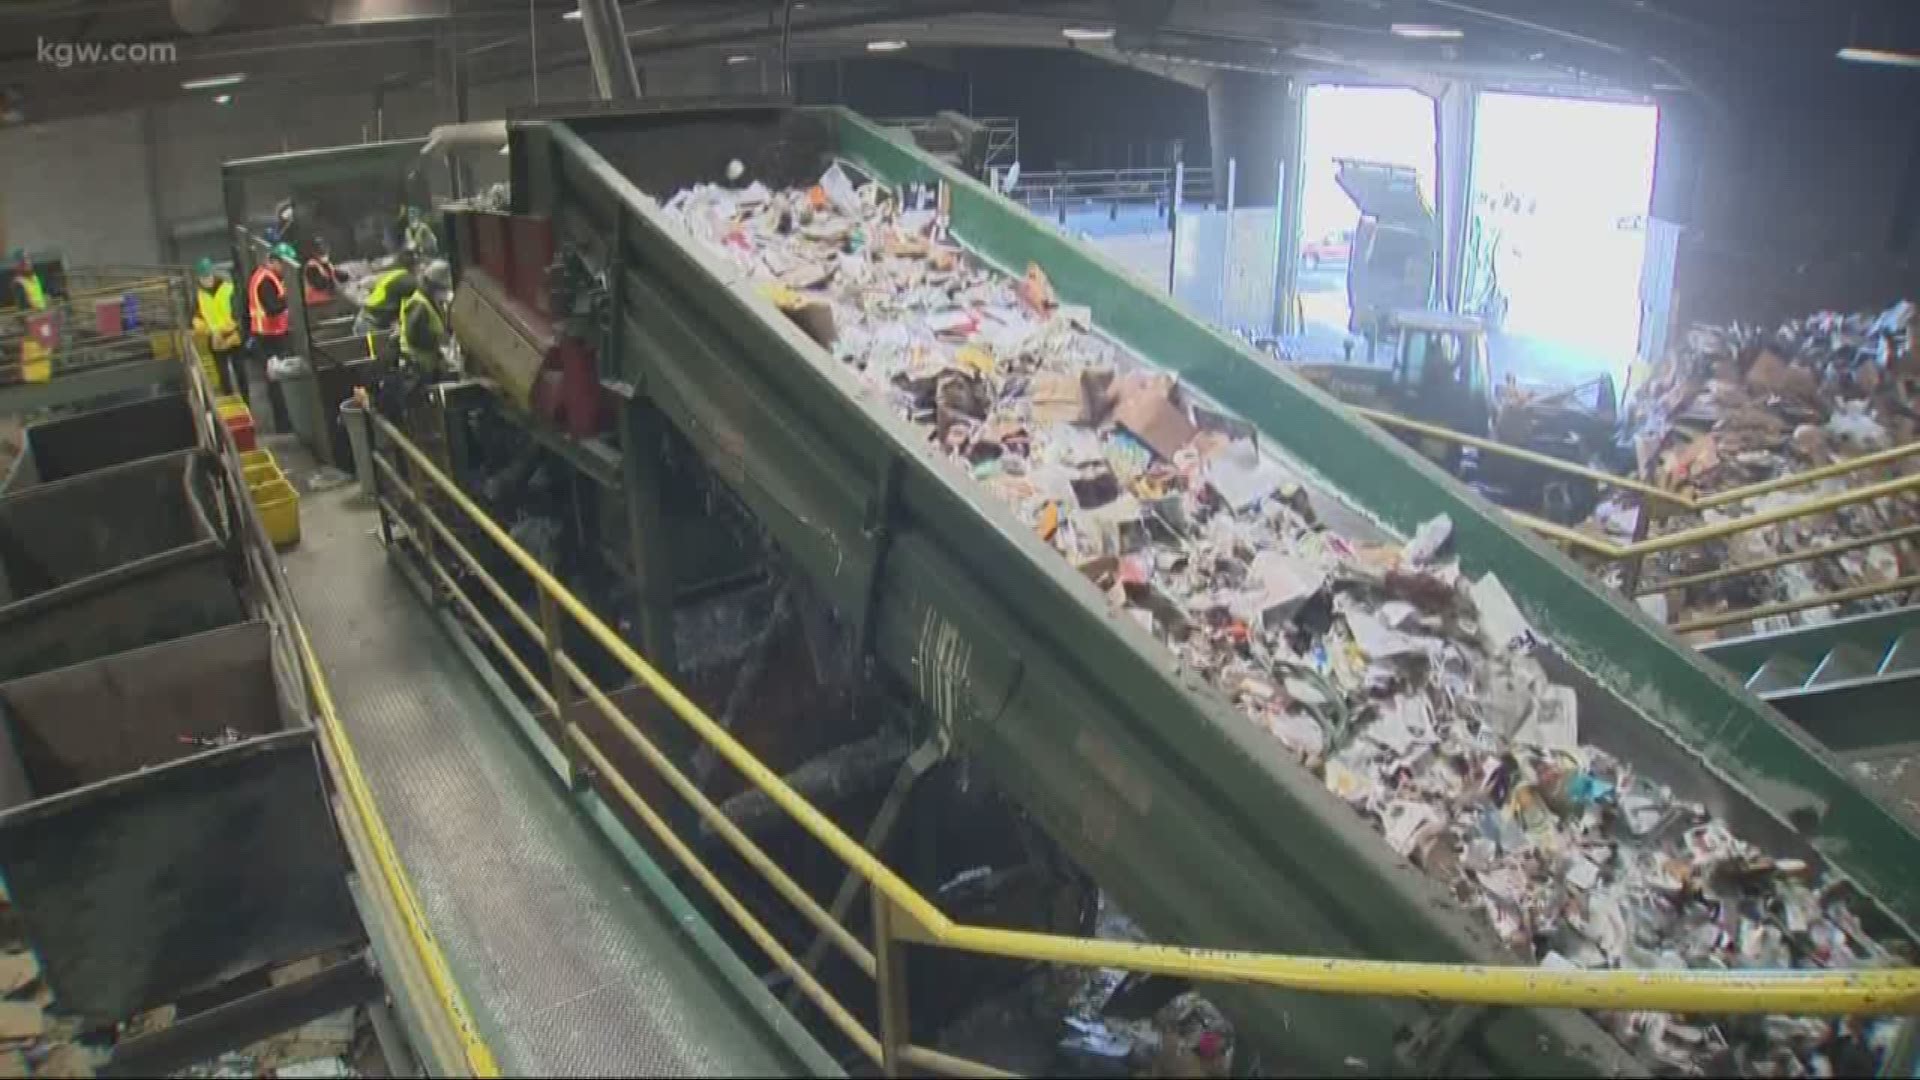 The Portland area will not see recycling changes.